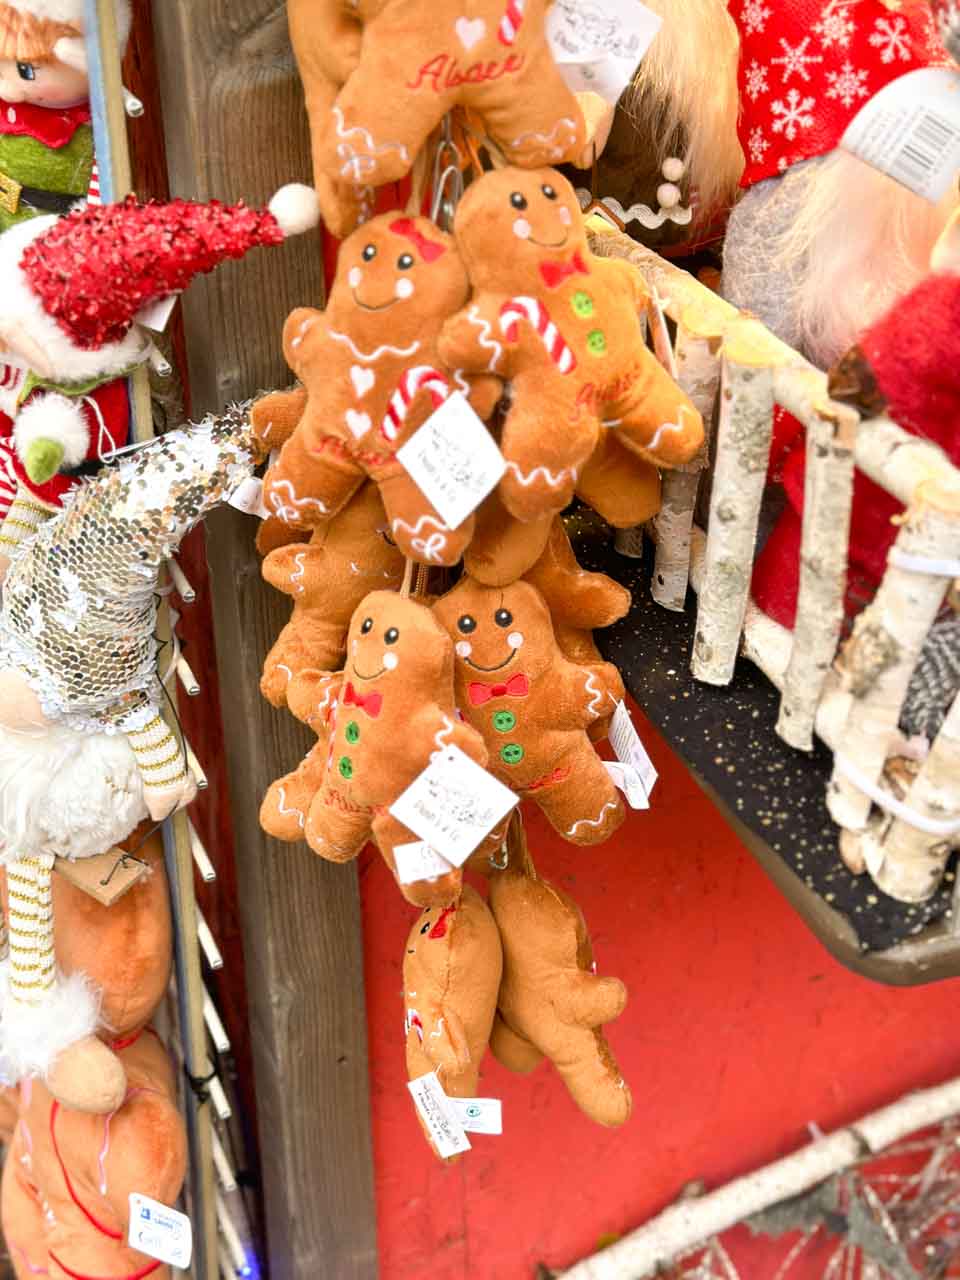 Plush gingerbread men ornaments with cheerful faces hanging at a Christmas market stall in Colmar